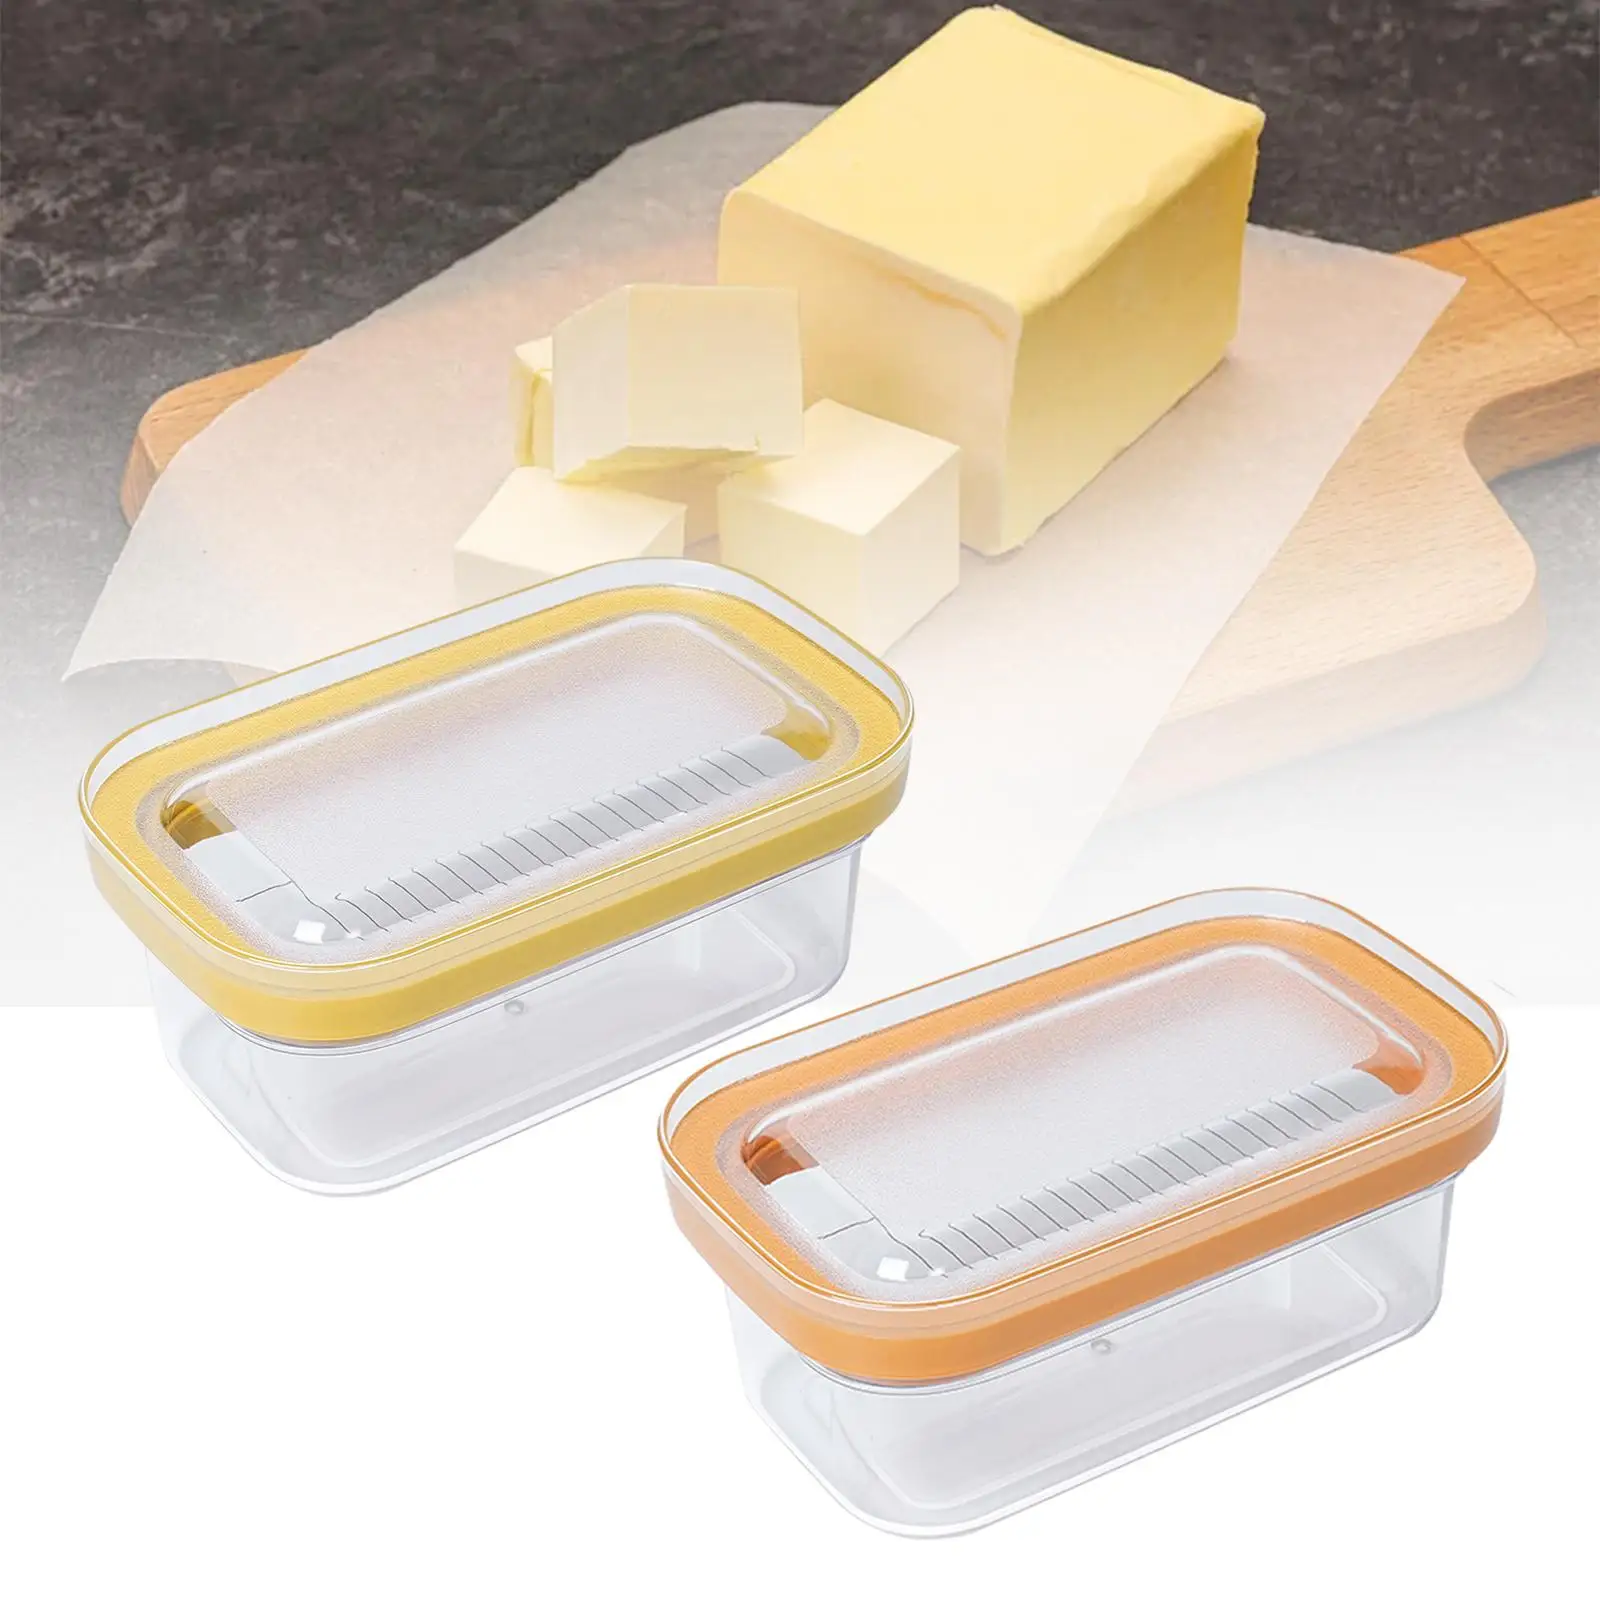 Butter Cheese Storage Butter Container Butter Keeper Container Butter Dish Container for Baking Countertop Dining Kitchen Fridge